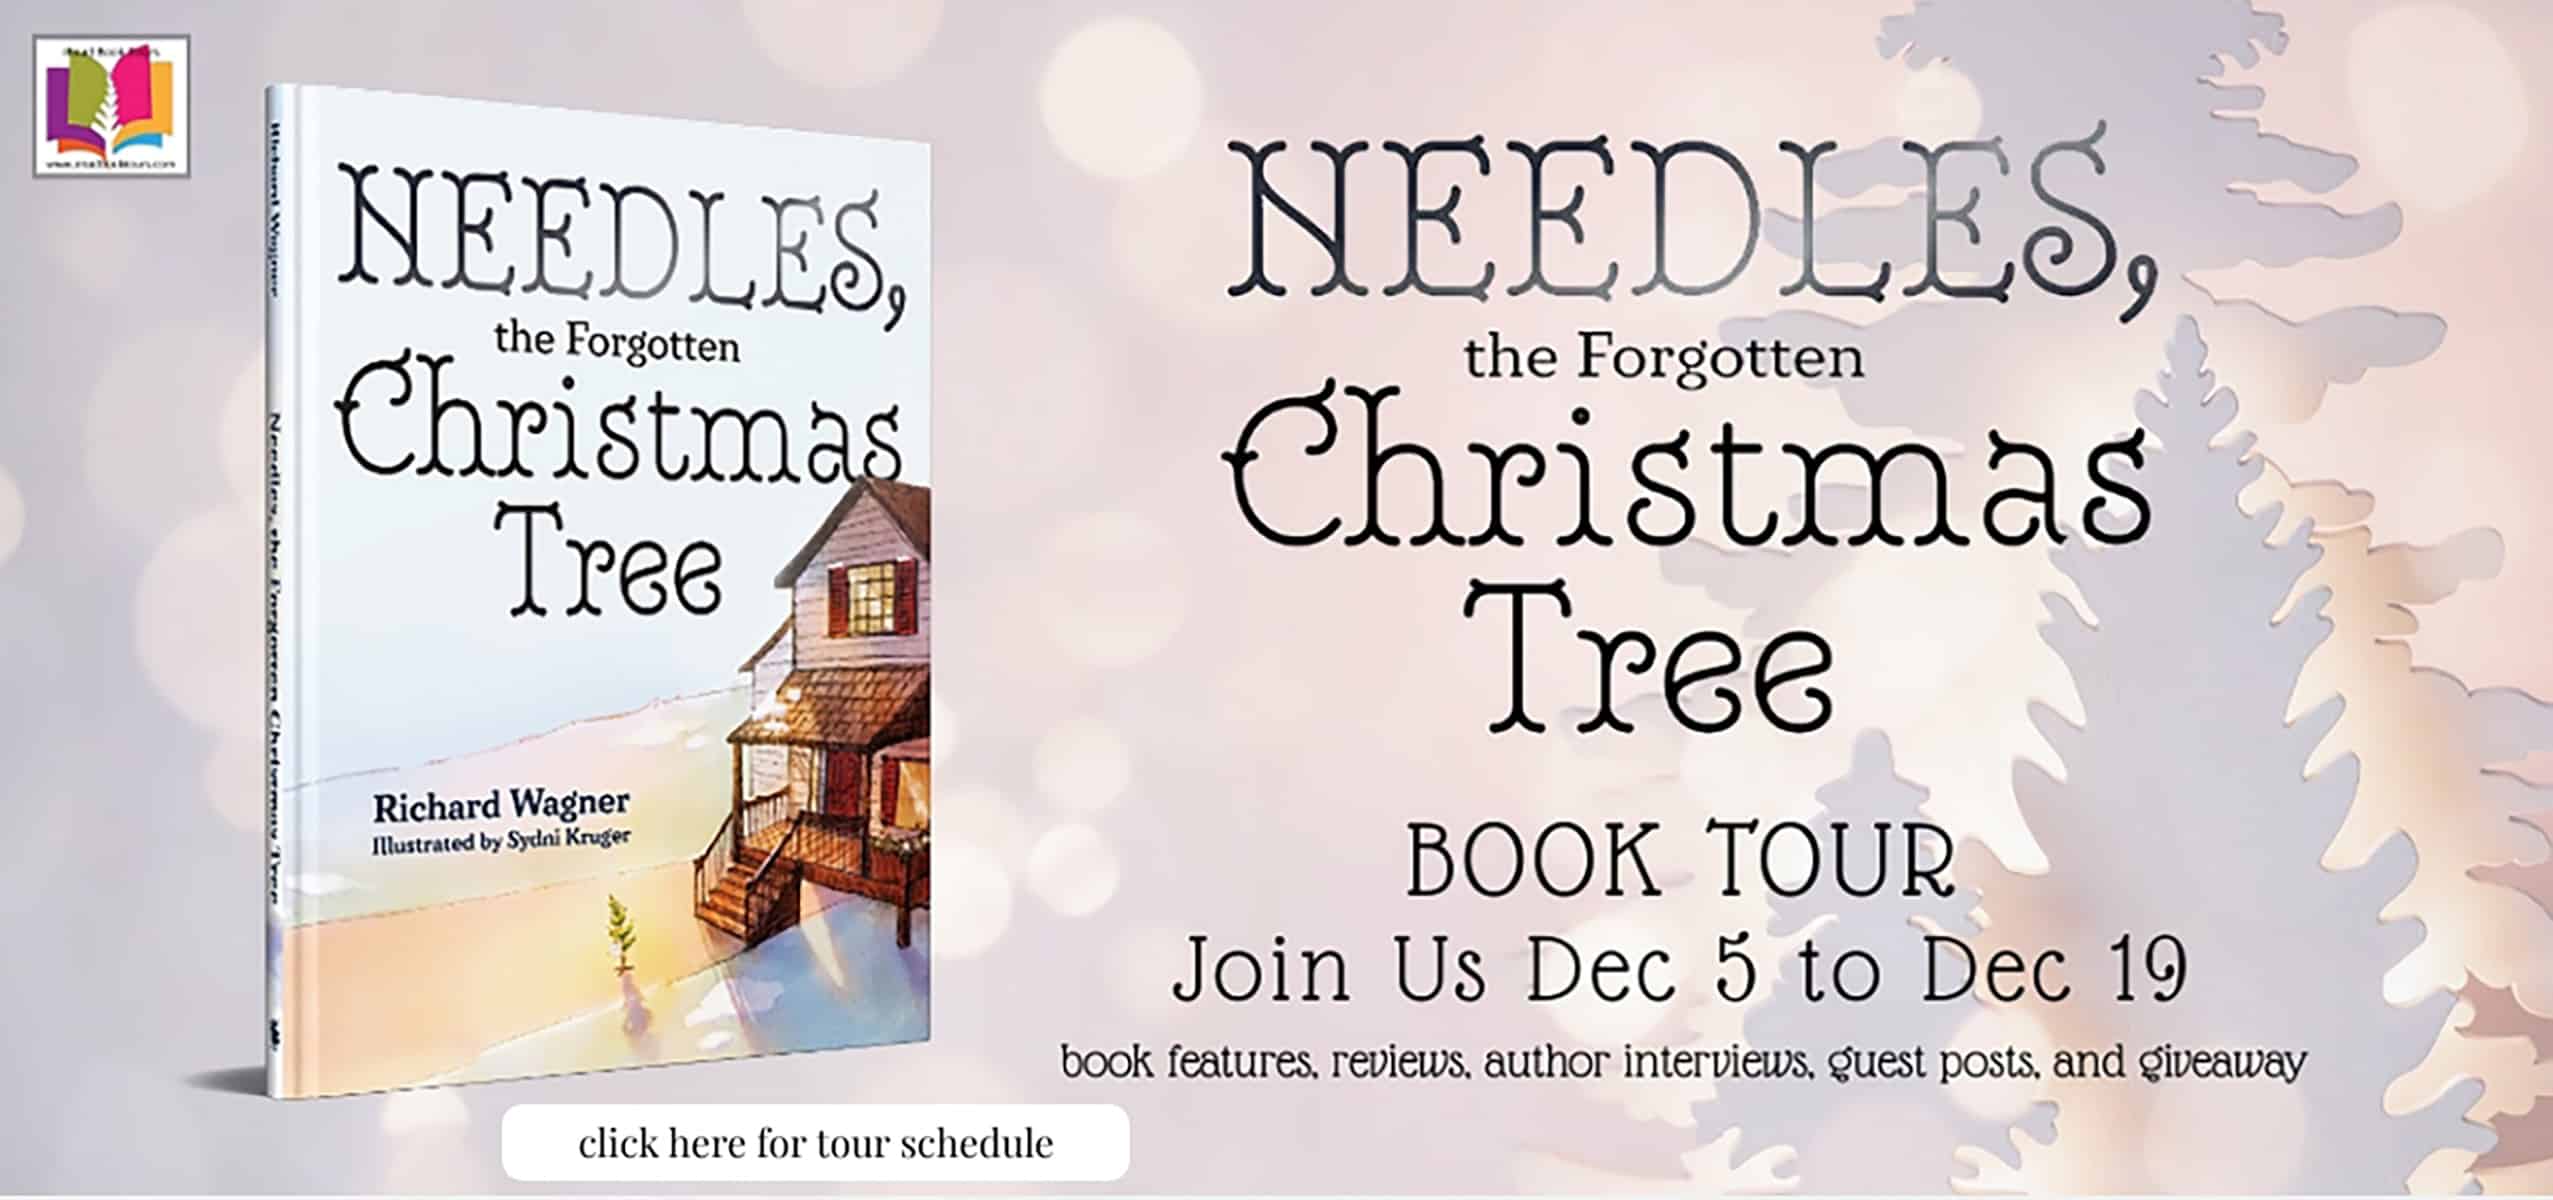 Needles, the Forgotten Christmas Tree by Richard Wagner | Children's Book Review ~ Author Guest Post